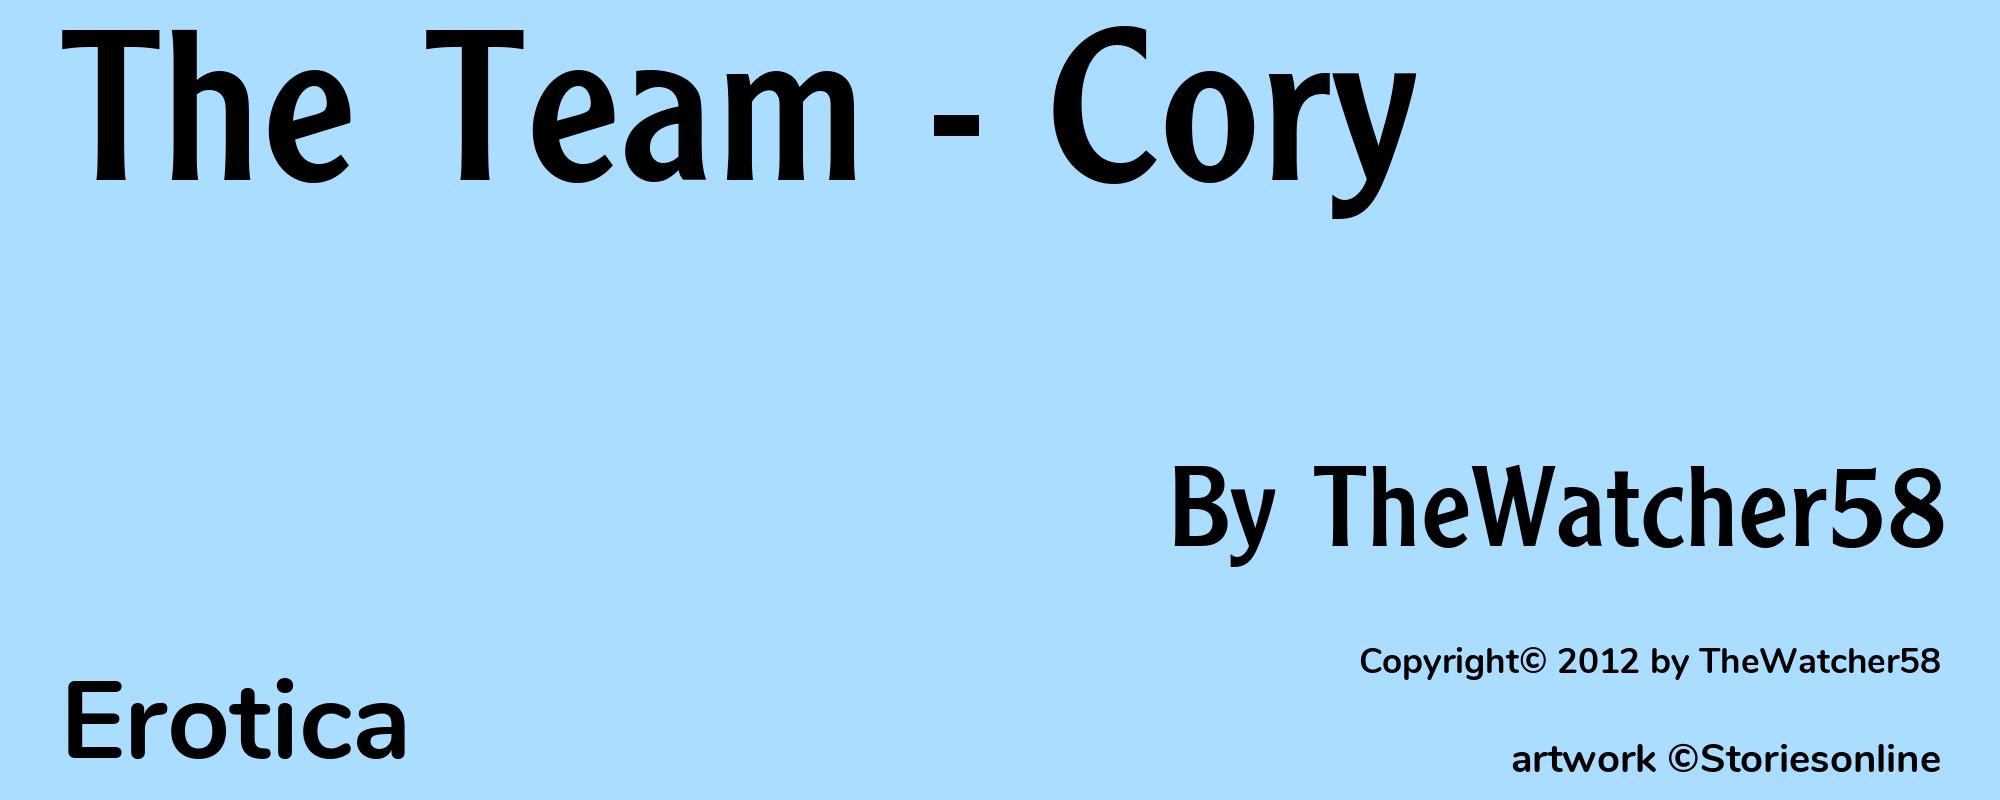 The Team - Cory - Cover